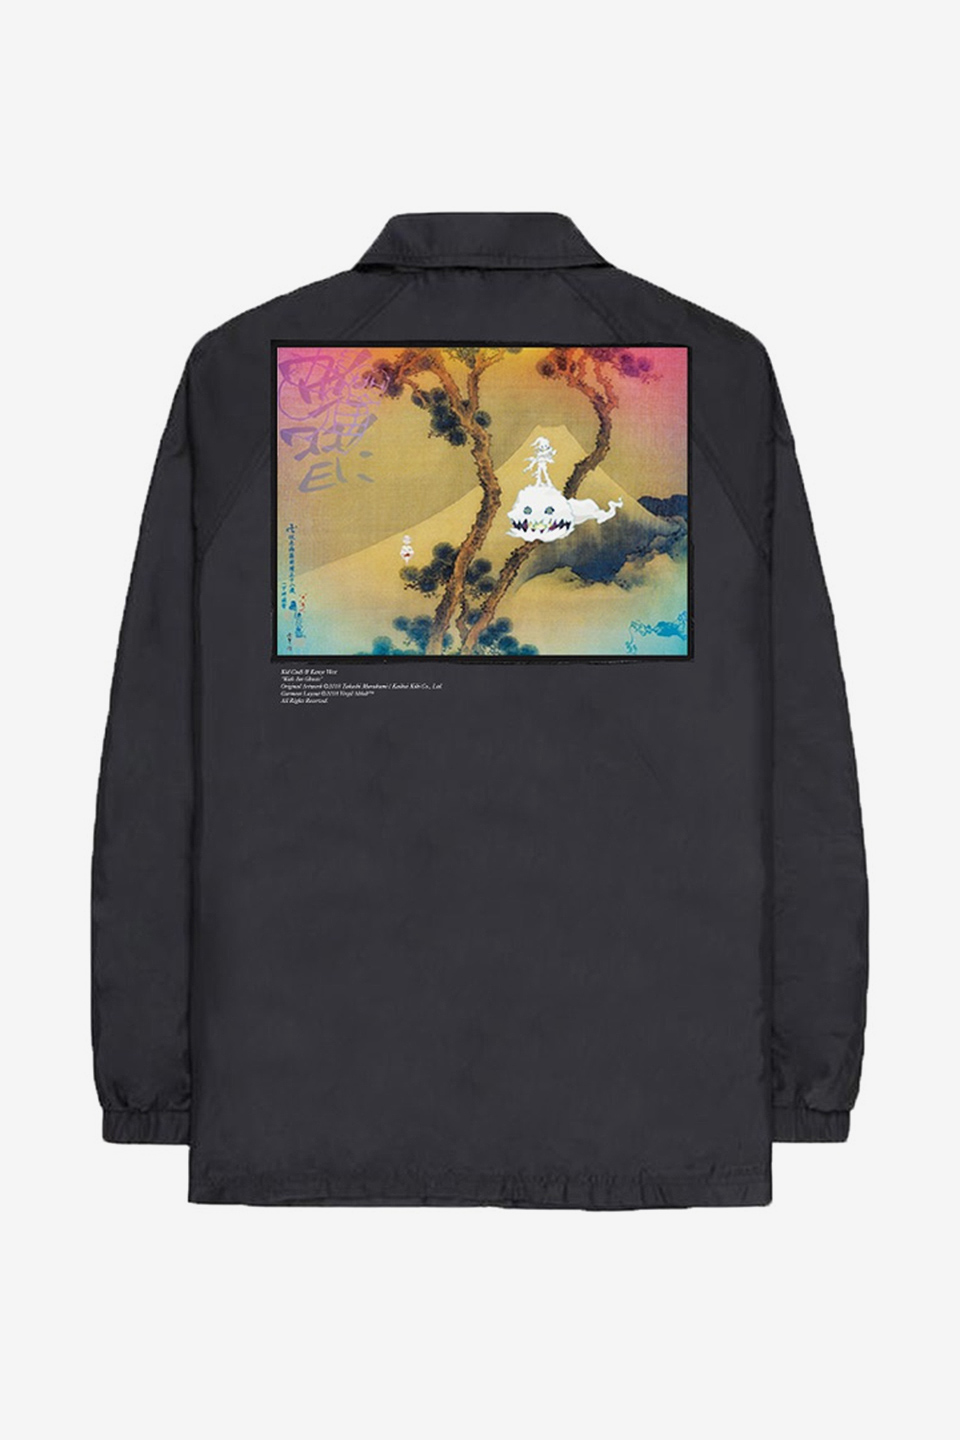 New Kids See Ghosts Ye Merch Is